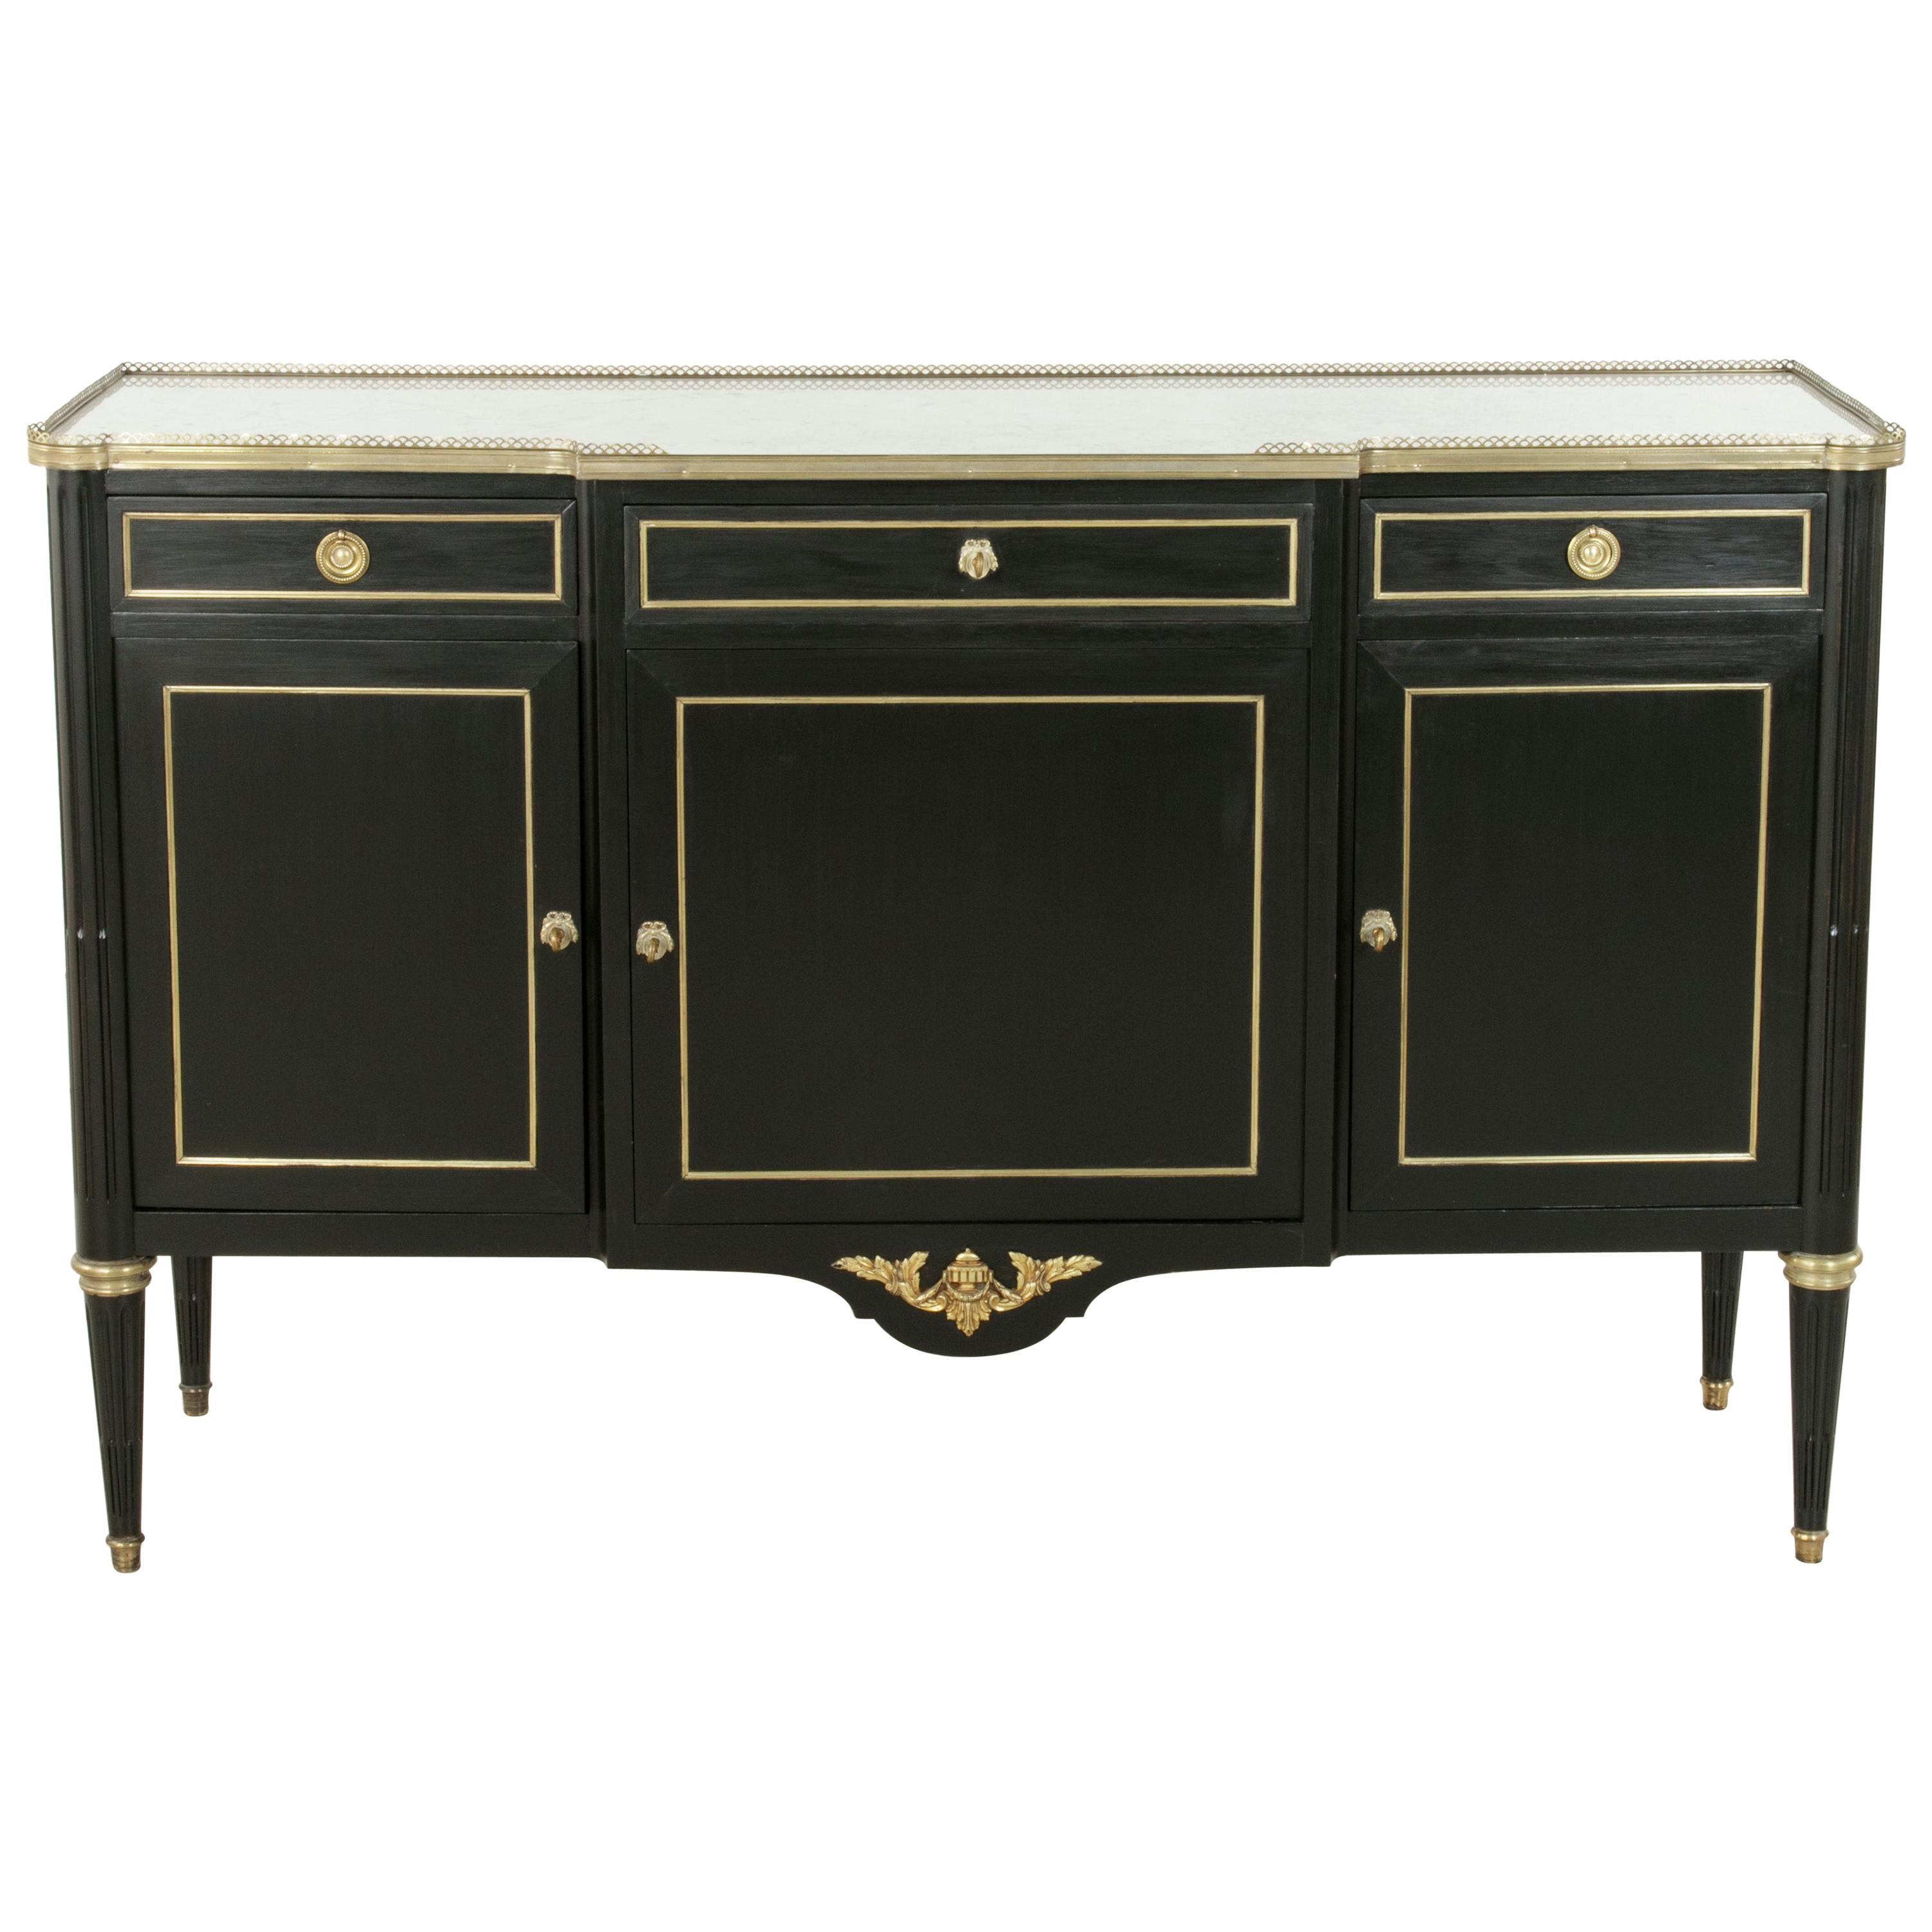 French Louis XVI Style Ebonized Buffet or Sideboard with White Marble Top